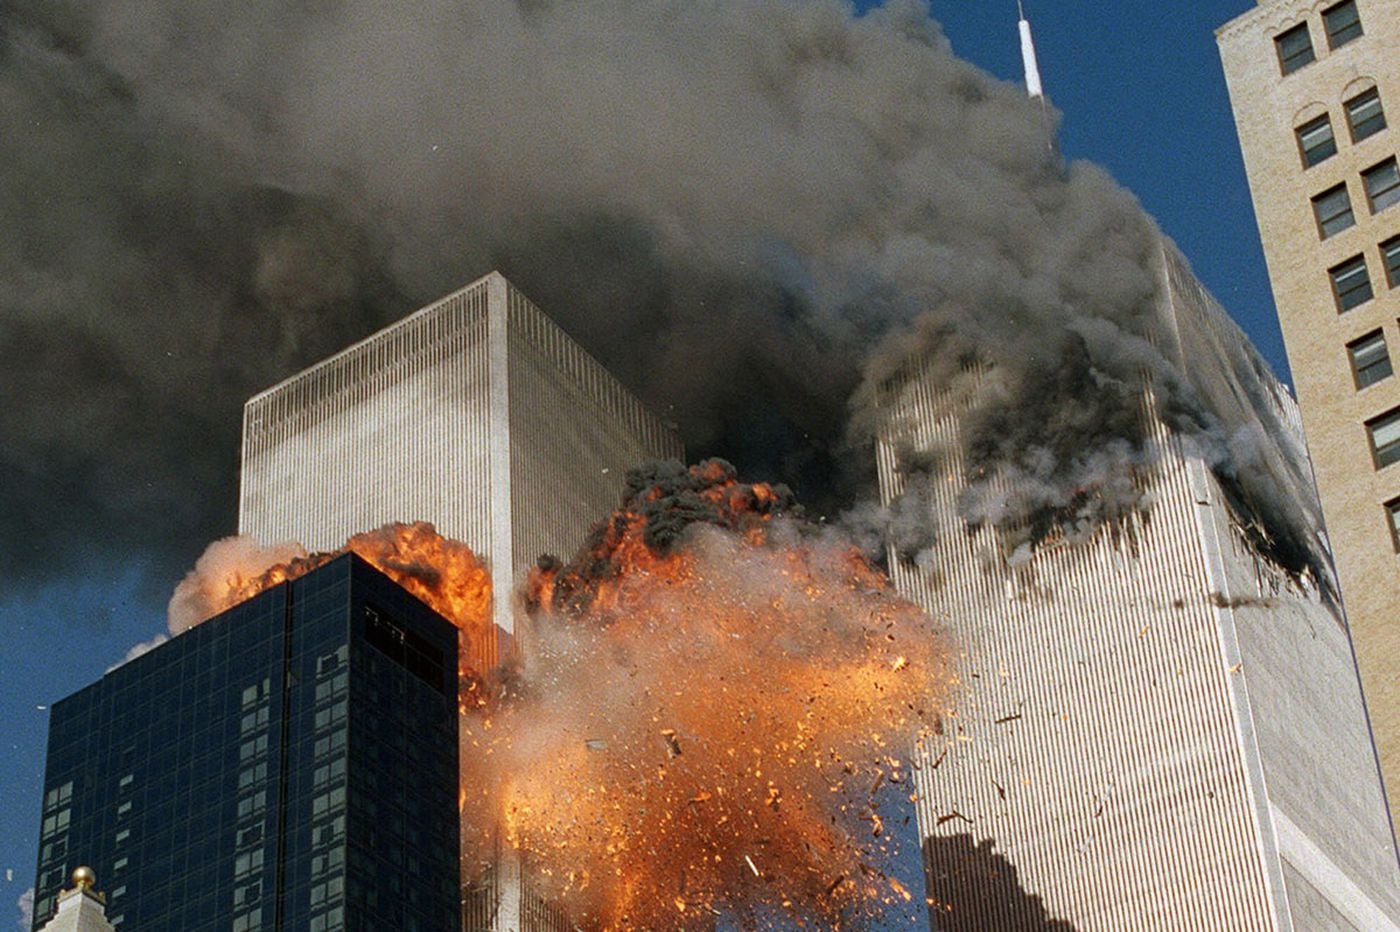 Archive Anonymous Villains And Civilian Targets Add To 9 11 Evil